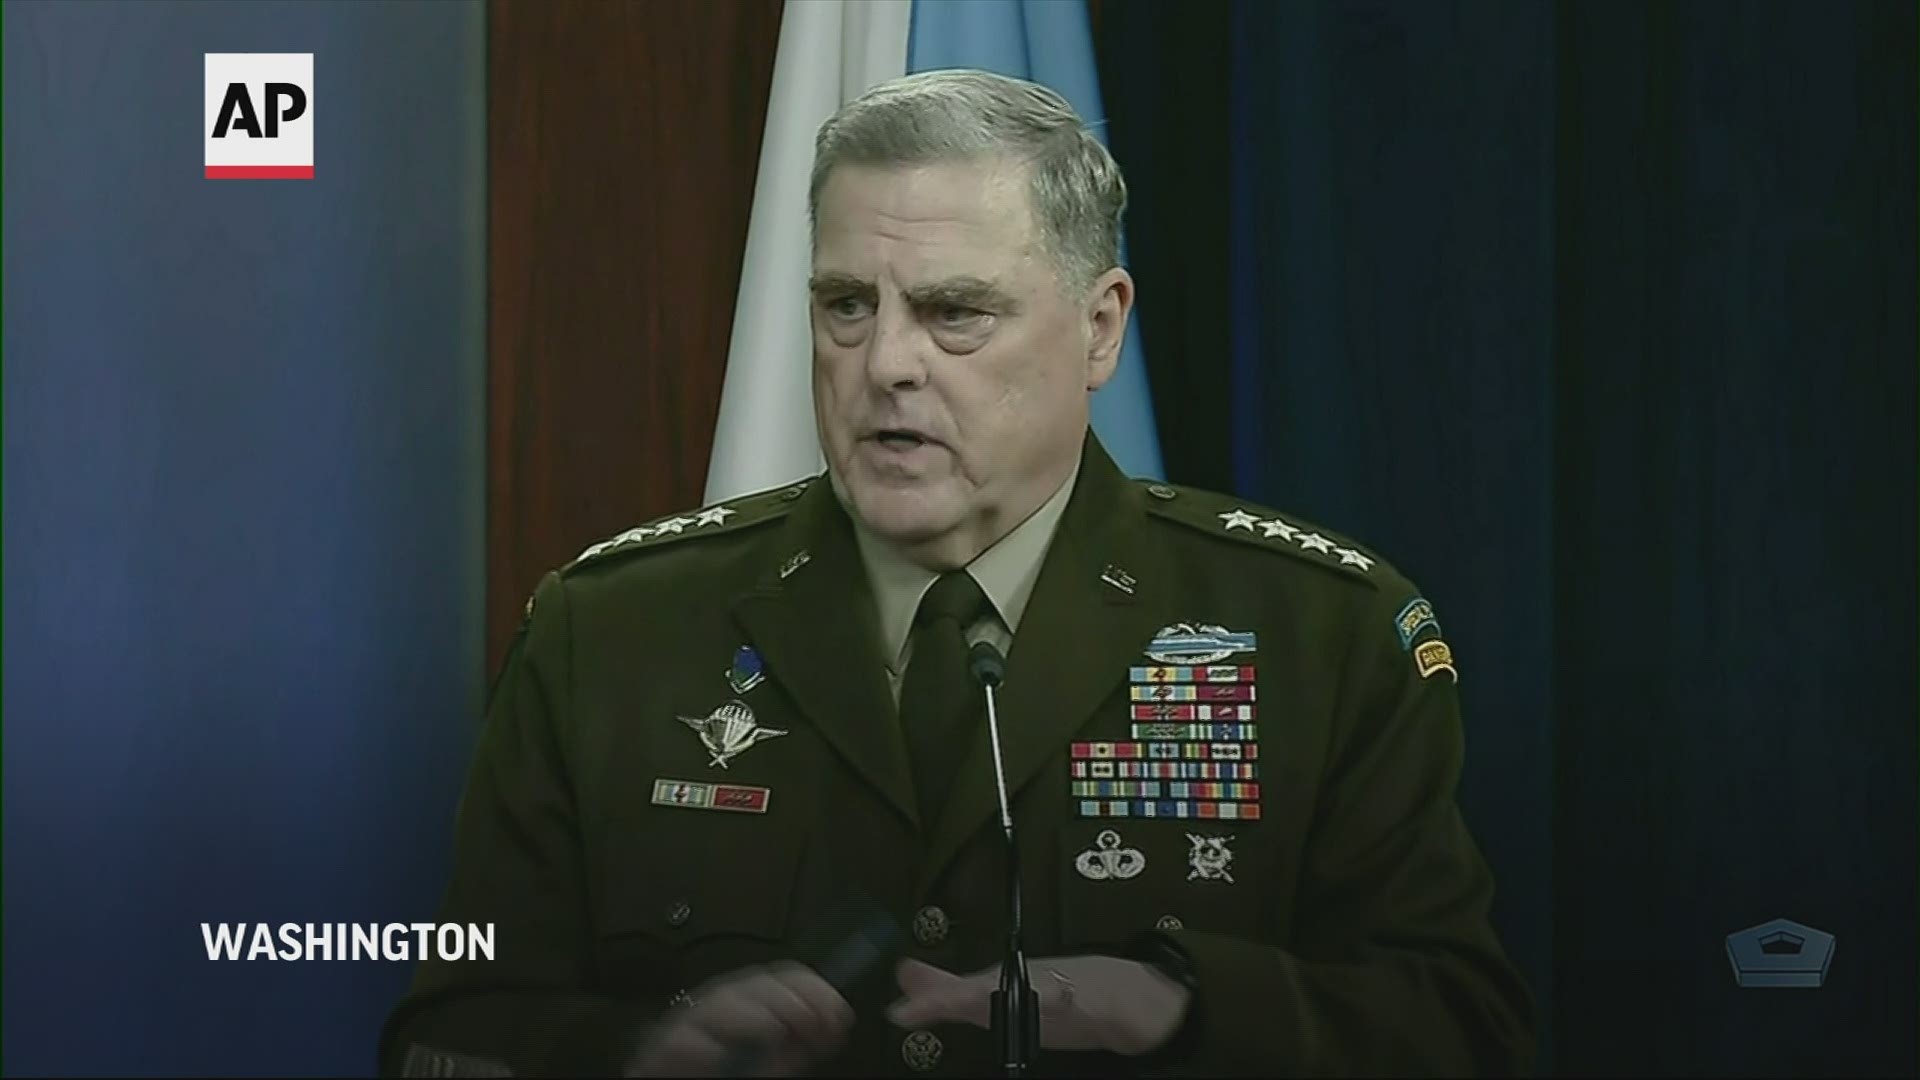 The chairman of the Joint Chiefs of Staff says the Taliban appear to have “strategic momentum” in the fight for control of Afghanistan